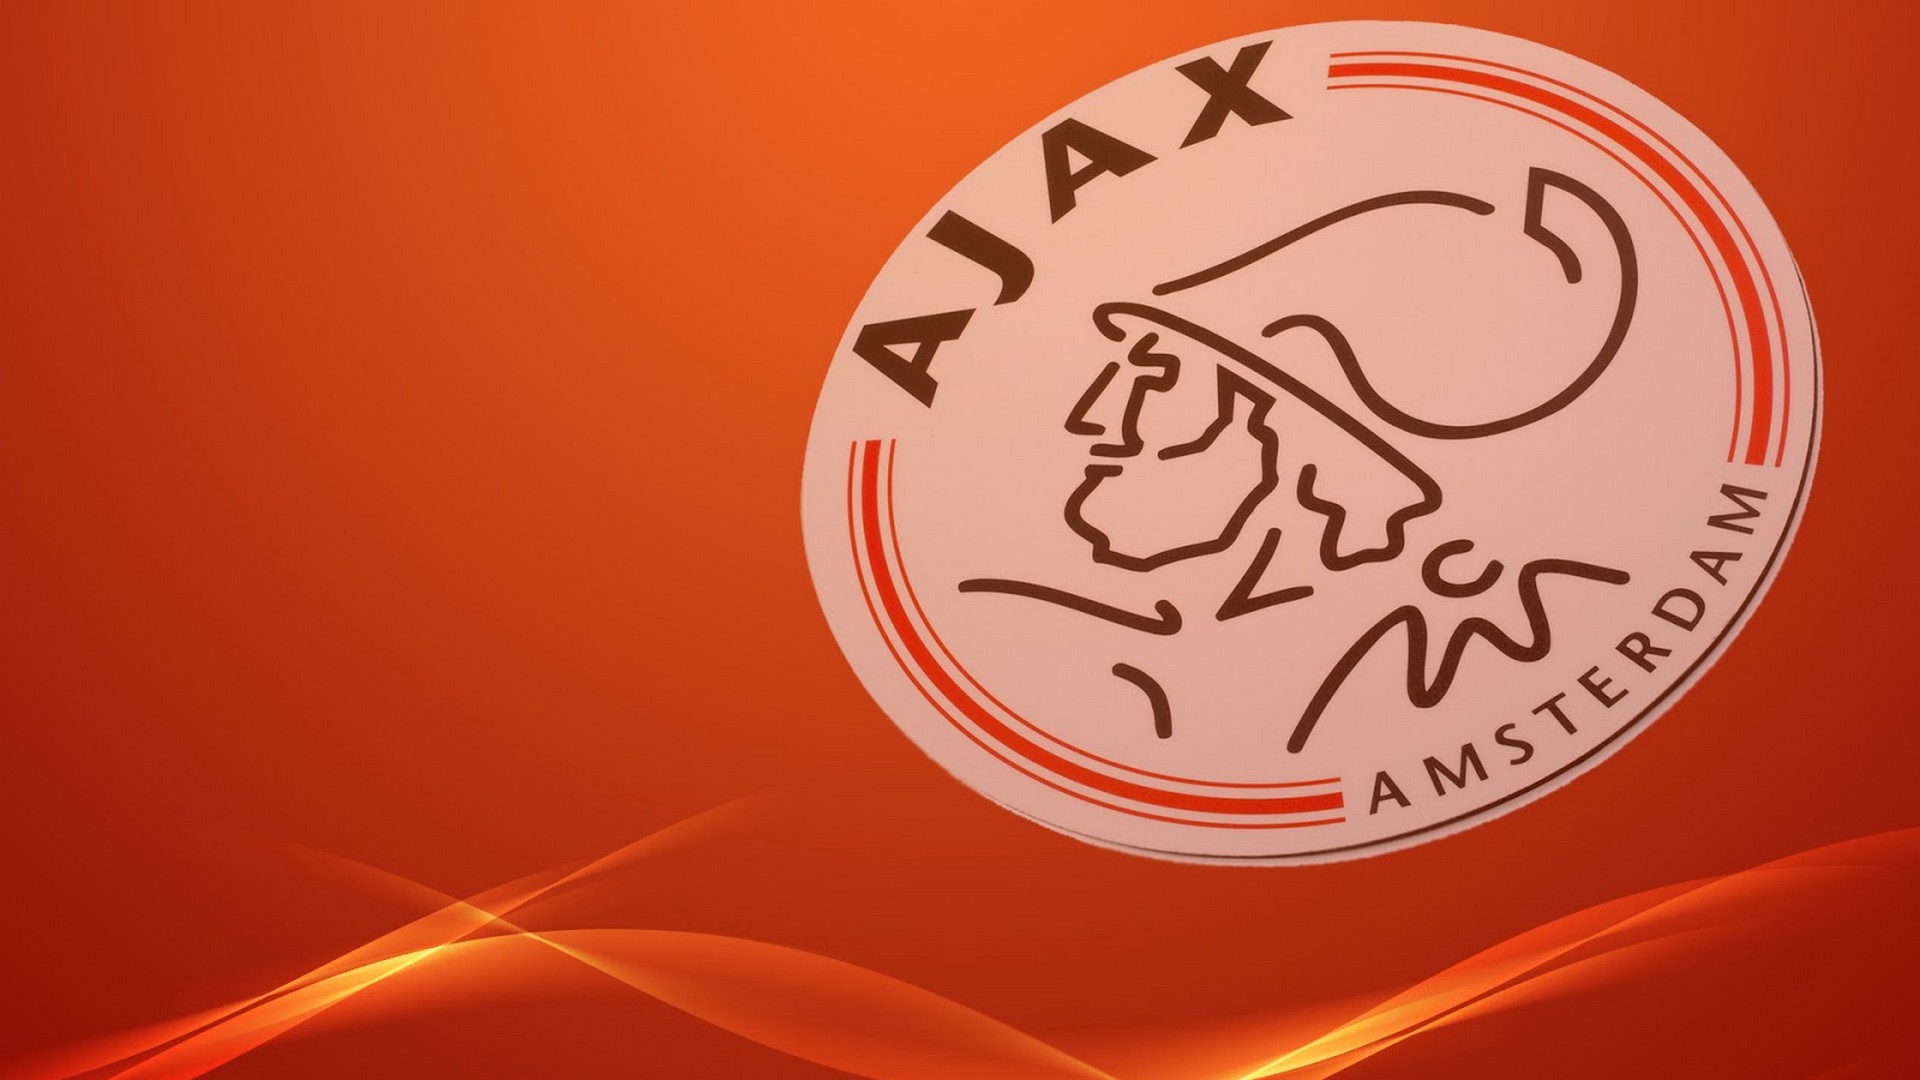 Wallpaper HD Ajax with high-resolution 1920x1080 pixel. You can use this wallpaper for your Desktop Computer Backgrounds, Mac Wallpapers, Android Lock screen or iPhone Screensavers and another smartphone device